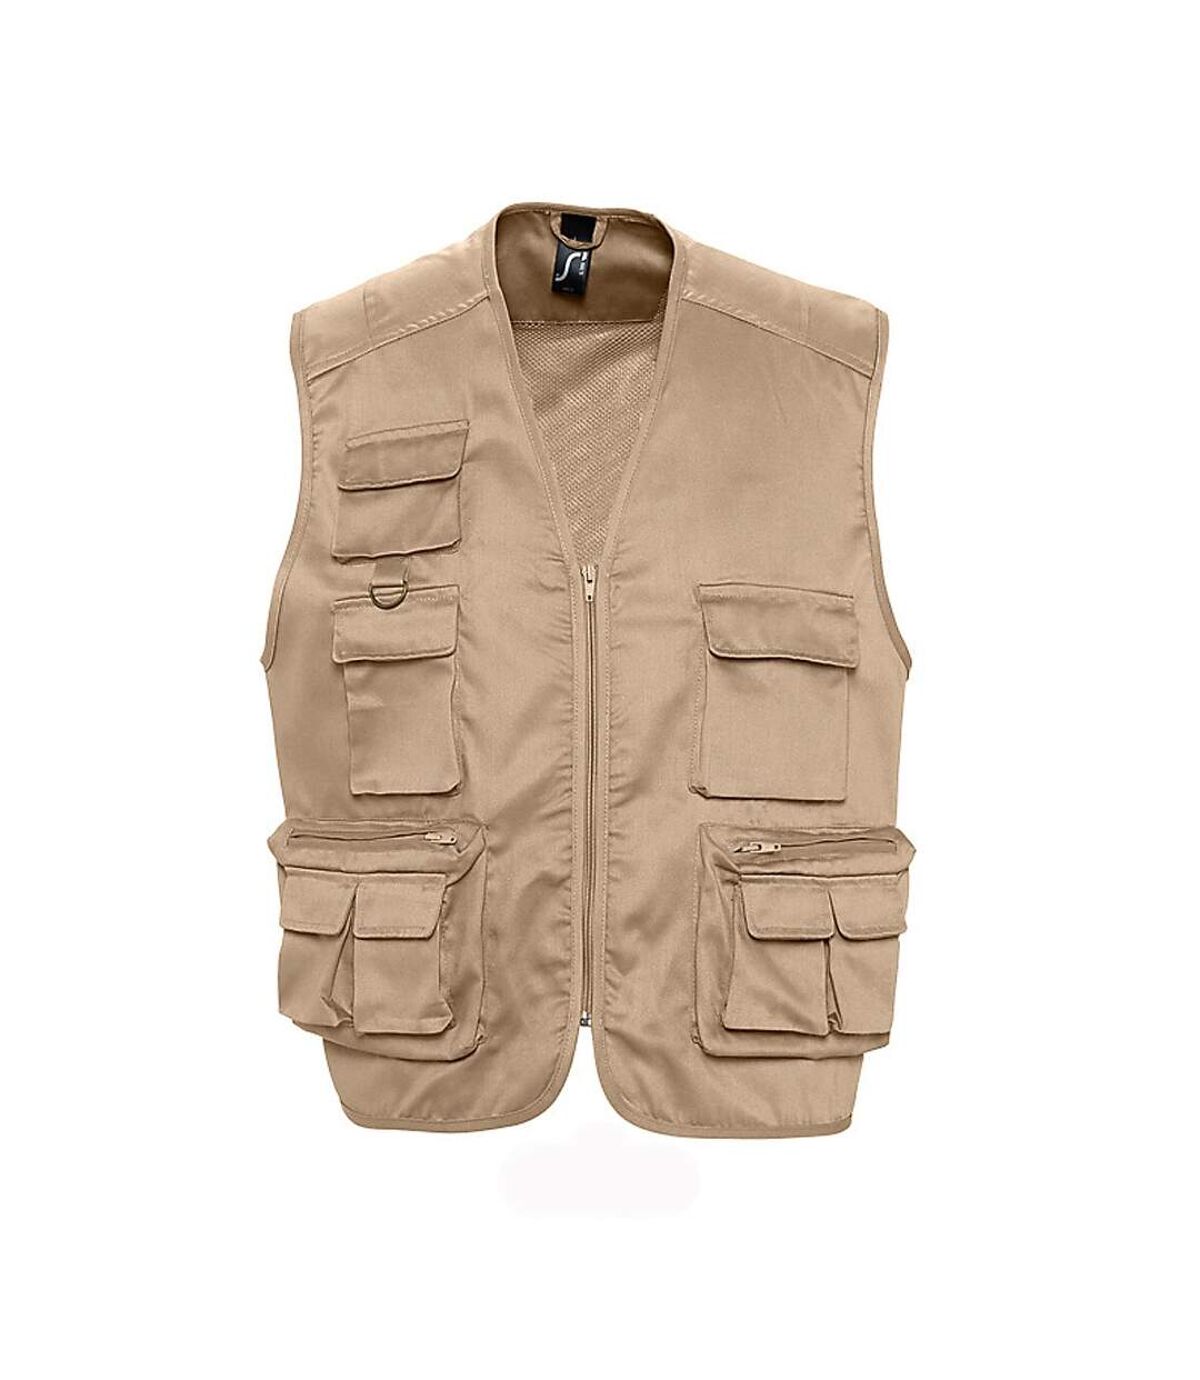 Gilet reporter multipoches sans manches - 43630 - beige